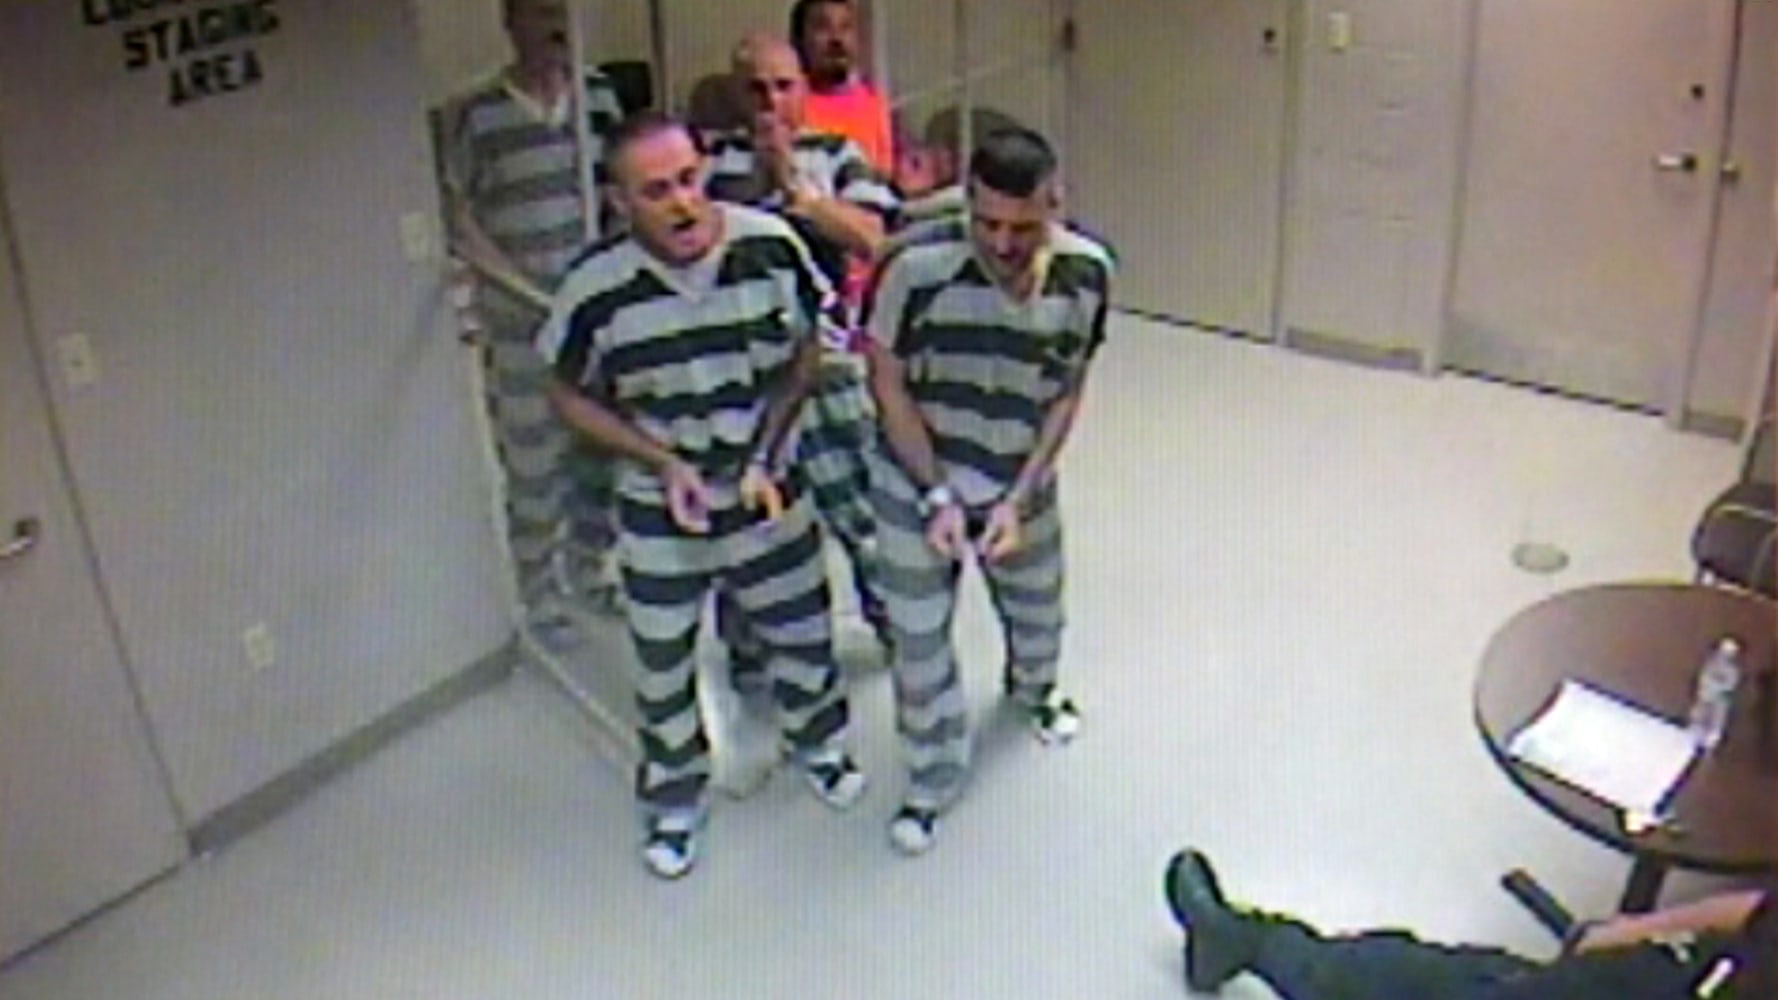 Texas Inmates Break Out of Cell to Save Guard Who Stopped Breathing and